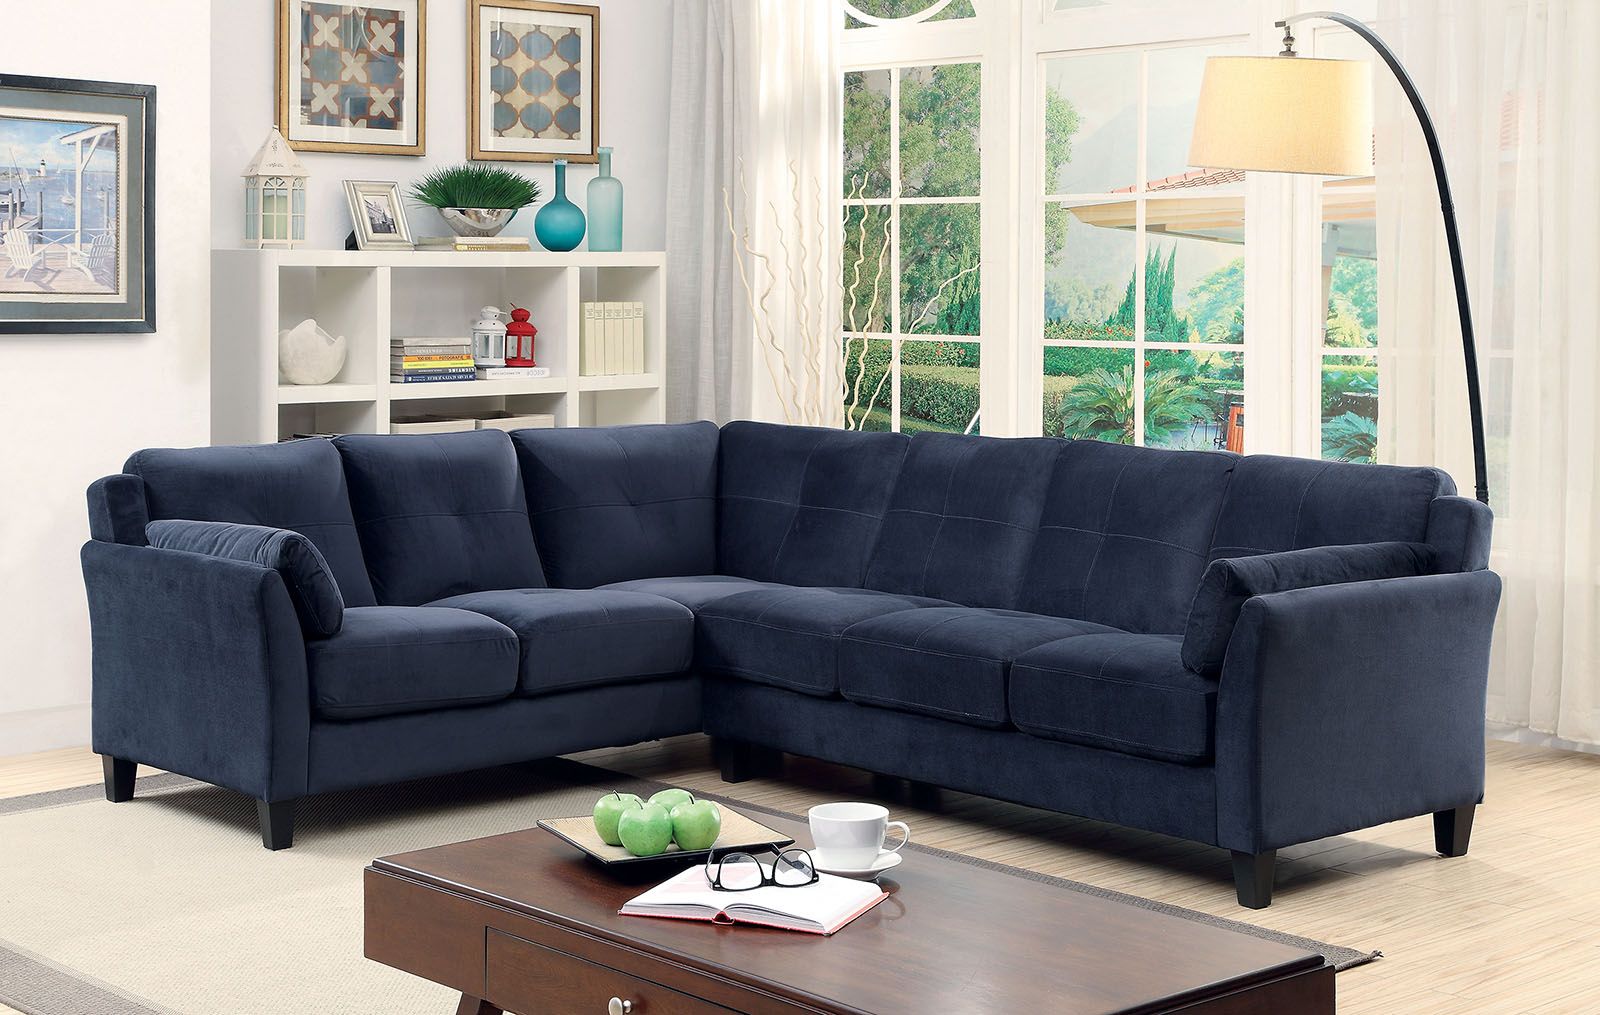 Featured Photo of 15 Best Ideas Paul Modular Sectional Sofas Blue